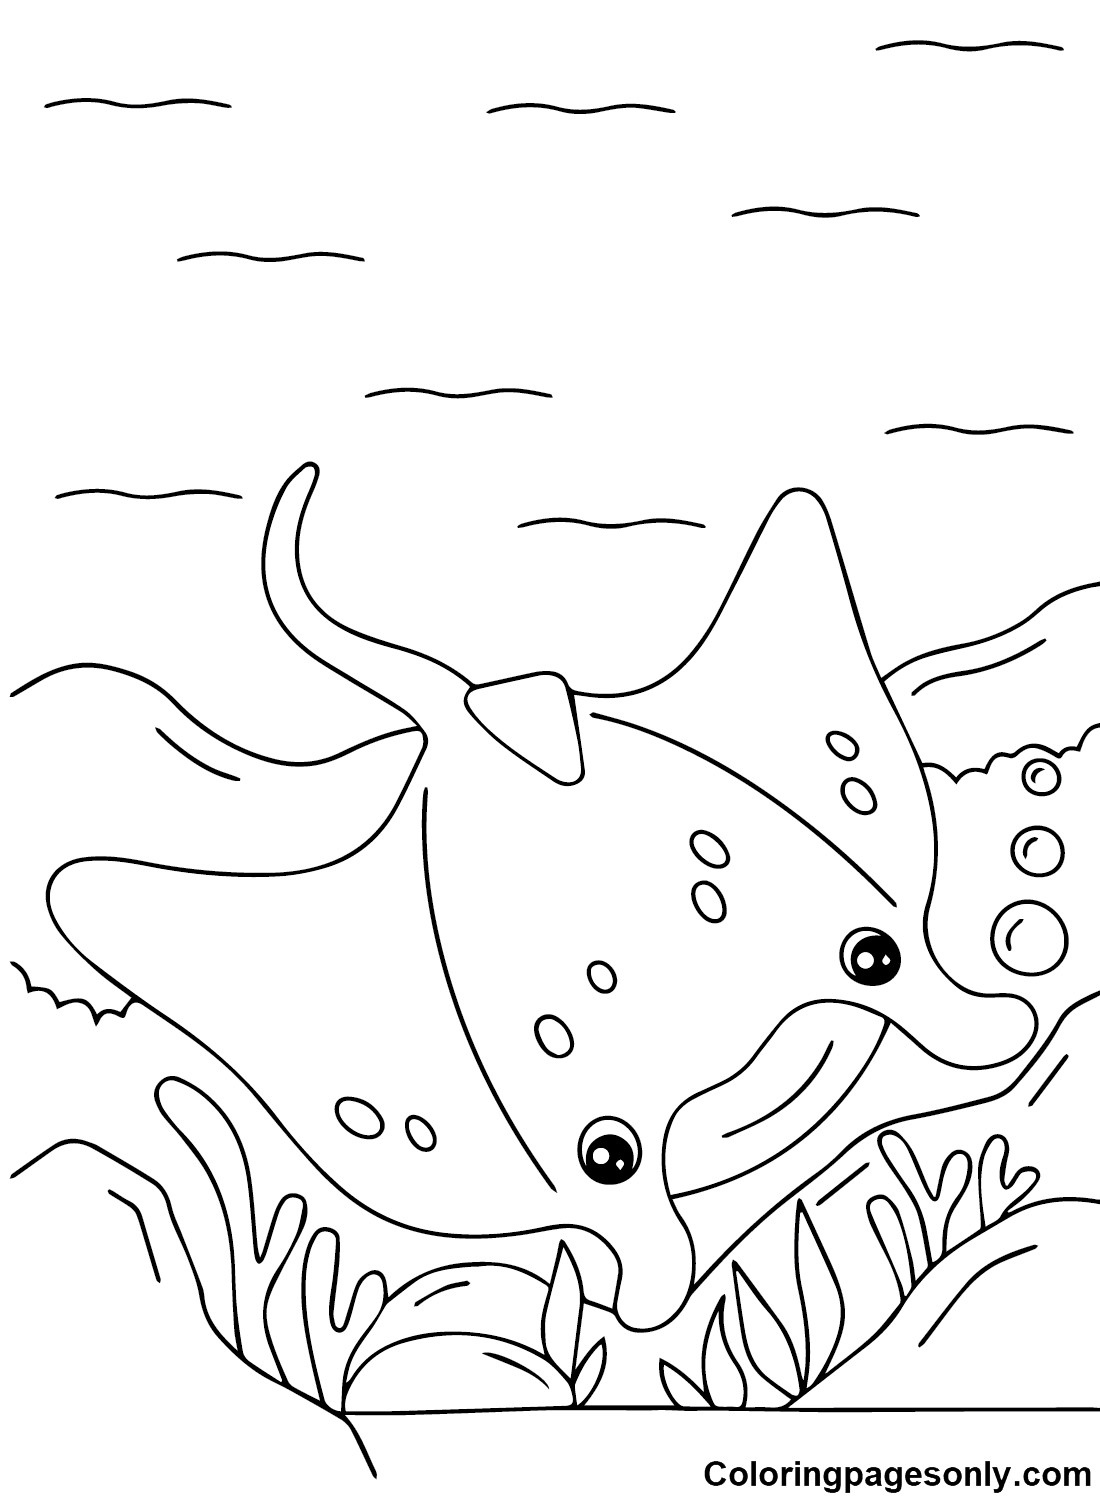 Stingray coloring pages printable for free download